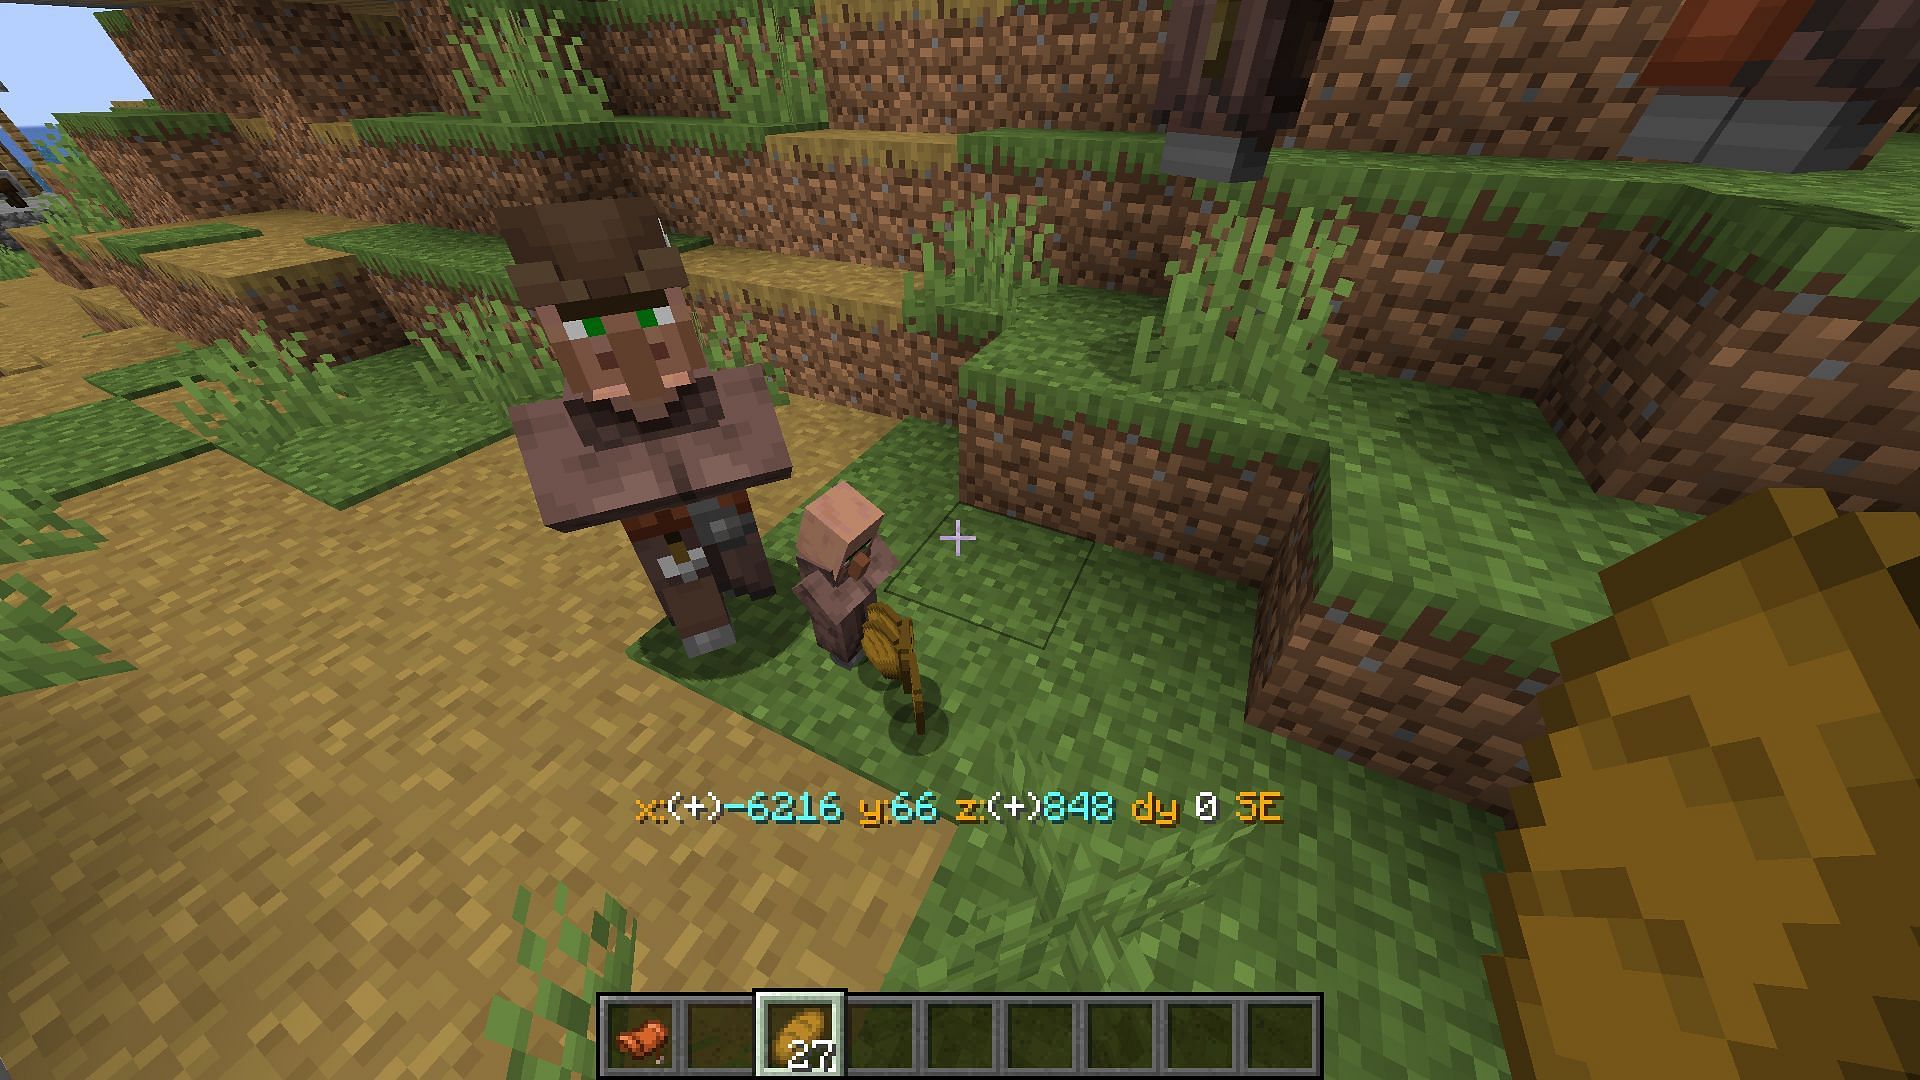 After a successful breed, Villagers enter a cooldown mode in Minecraft (Image via Mojang)